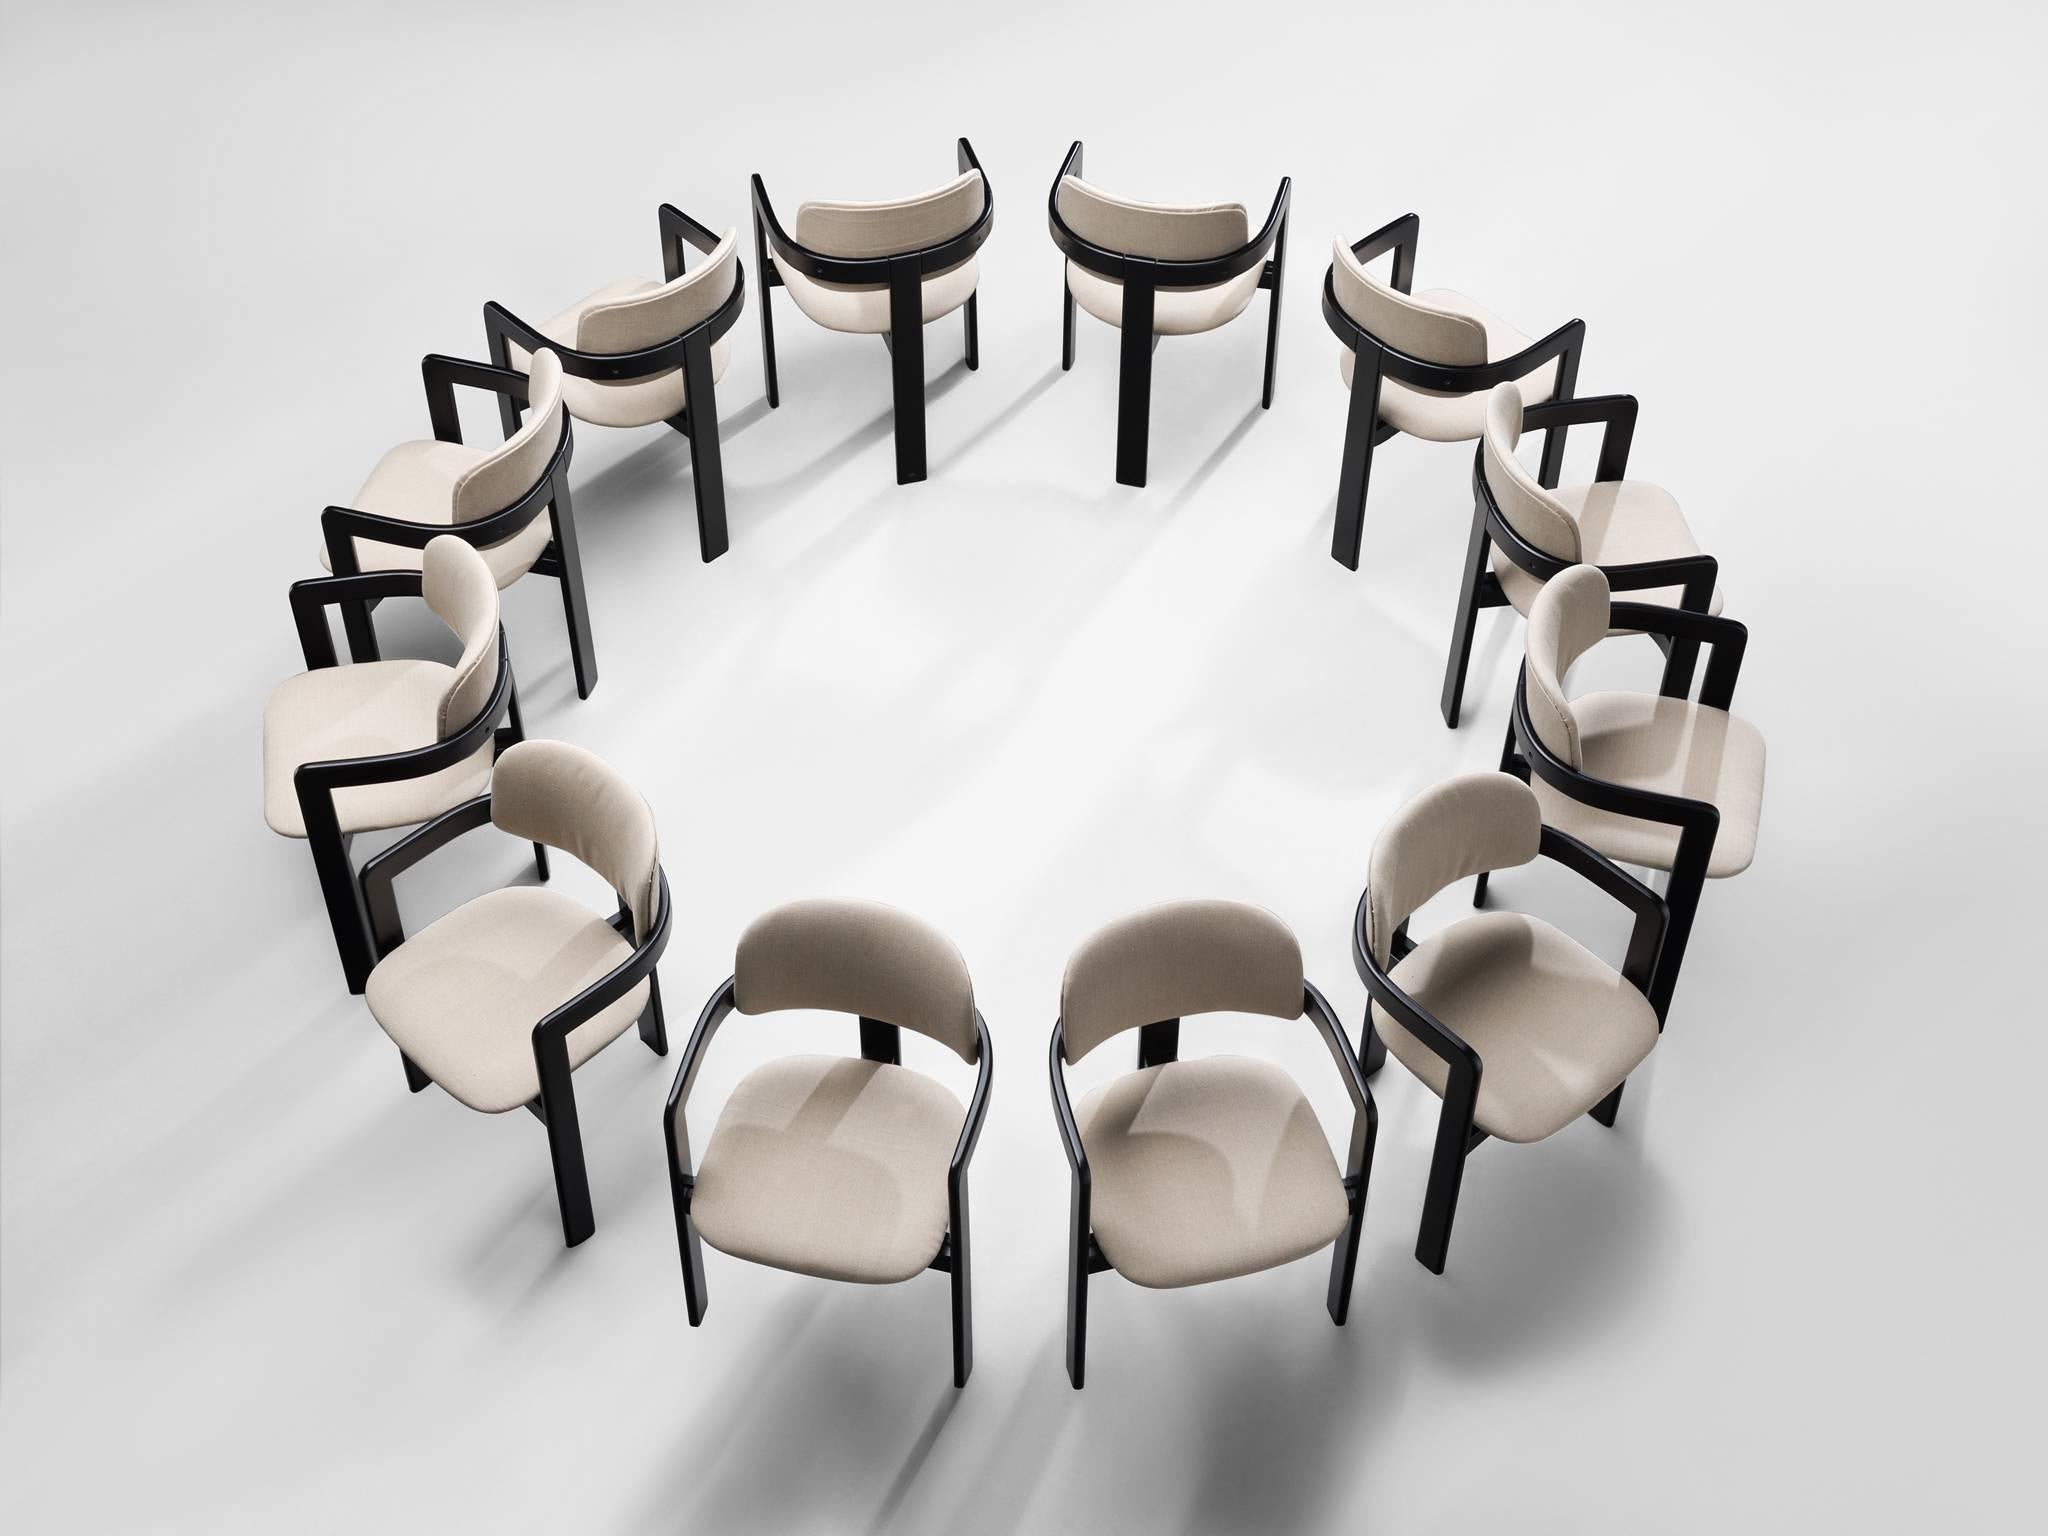 Set of 12 chairs, fabric, wood, Italy, 1960s.

This set of twelve armchairs is executed in high gloss black lacquered wood and grey muted upholstery. This is a comfortable design with simplistic and strong lines and proportions. The chairs have